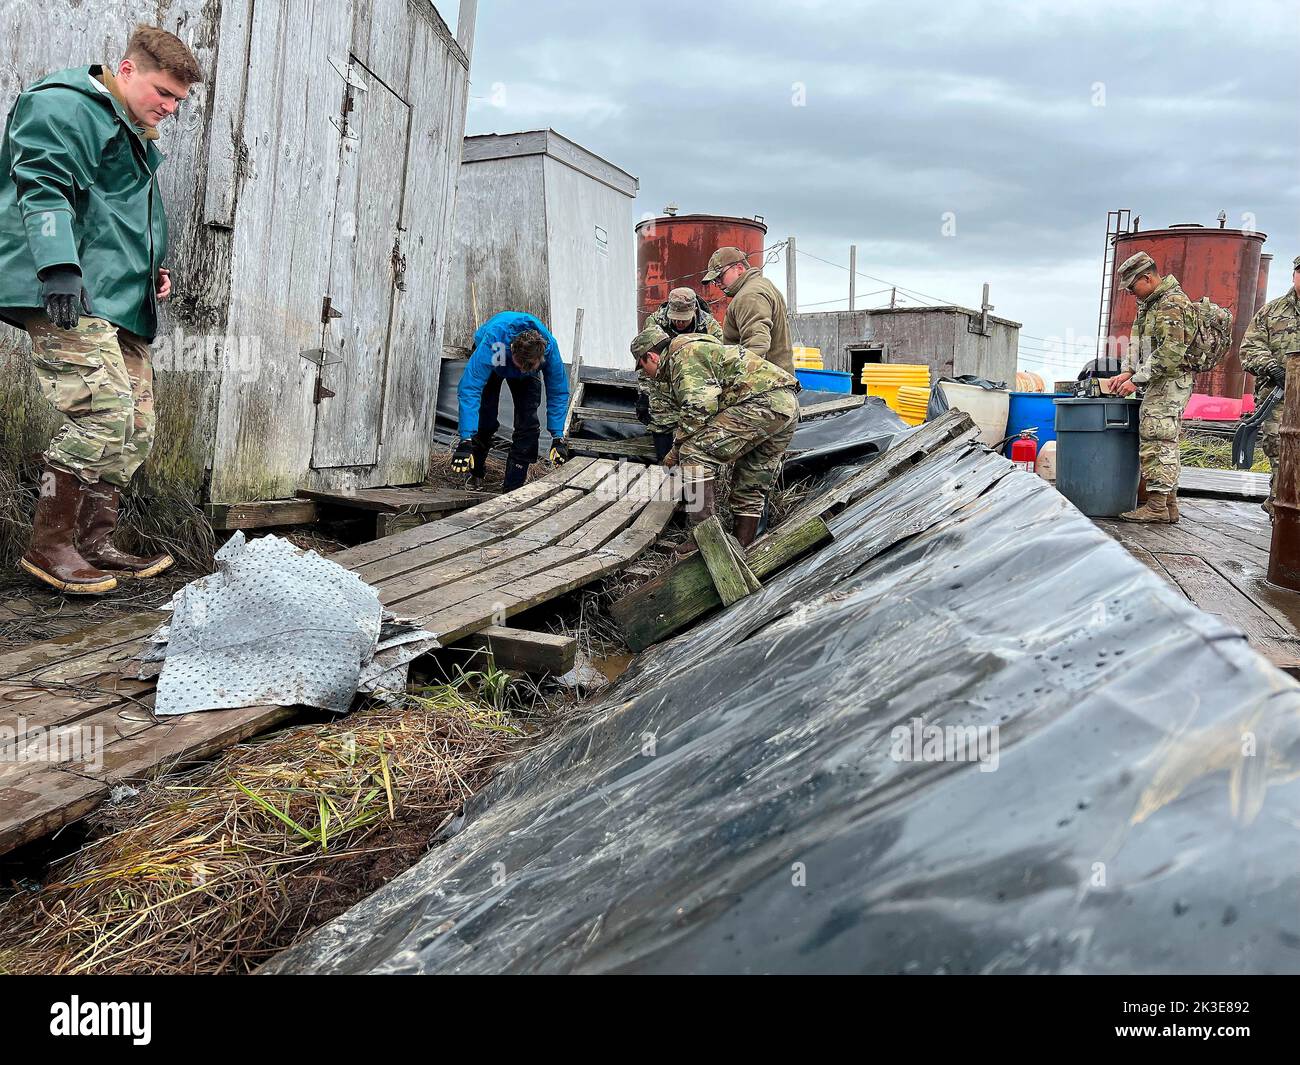 Newtok, United States. 22nd Sep, 2022. U.S. soldiers with the Alaska National Guard assist local residents with clean up of damaged property during Operation Merbok Response, September 22, 2022 in Newtok, Alaska. The remote coastal villages suffered damage from the remnants of Typhoon Merbok that caused flooding across more than 1,000 miles of Alaskan coastline. Credit: 1st Lt. Balinda O'Neal/US Army/Alamy Live News Stock Photo